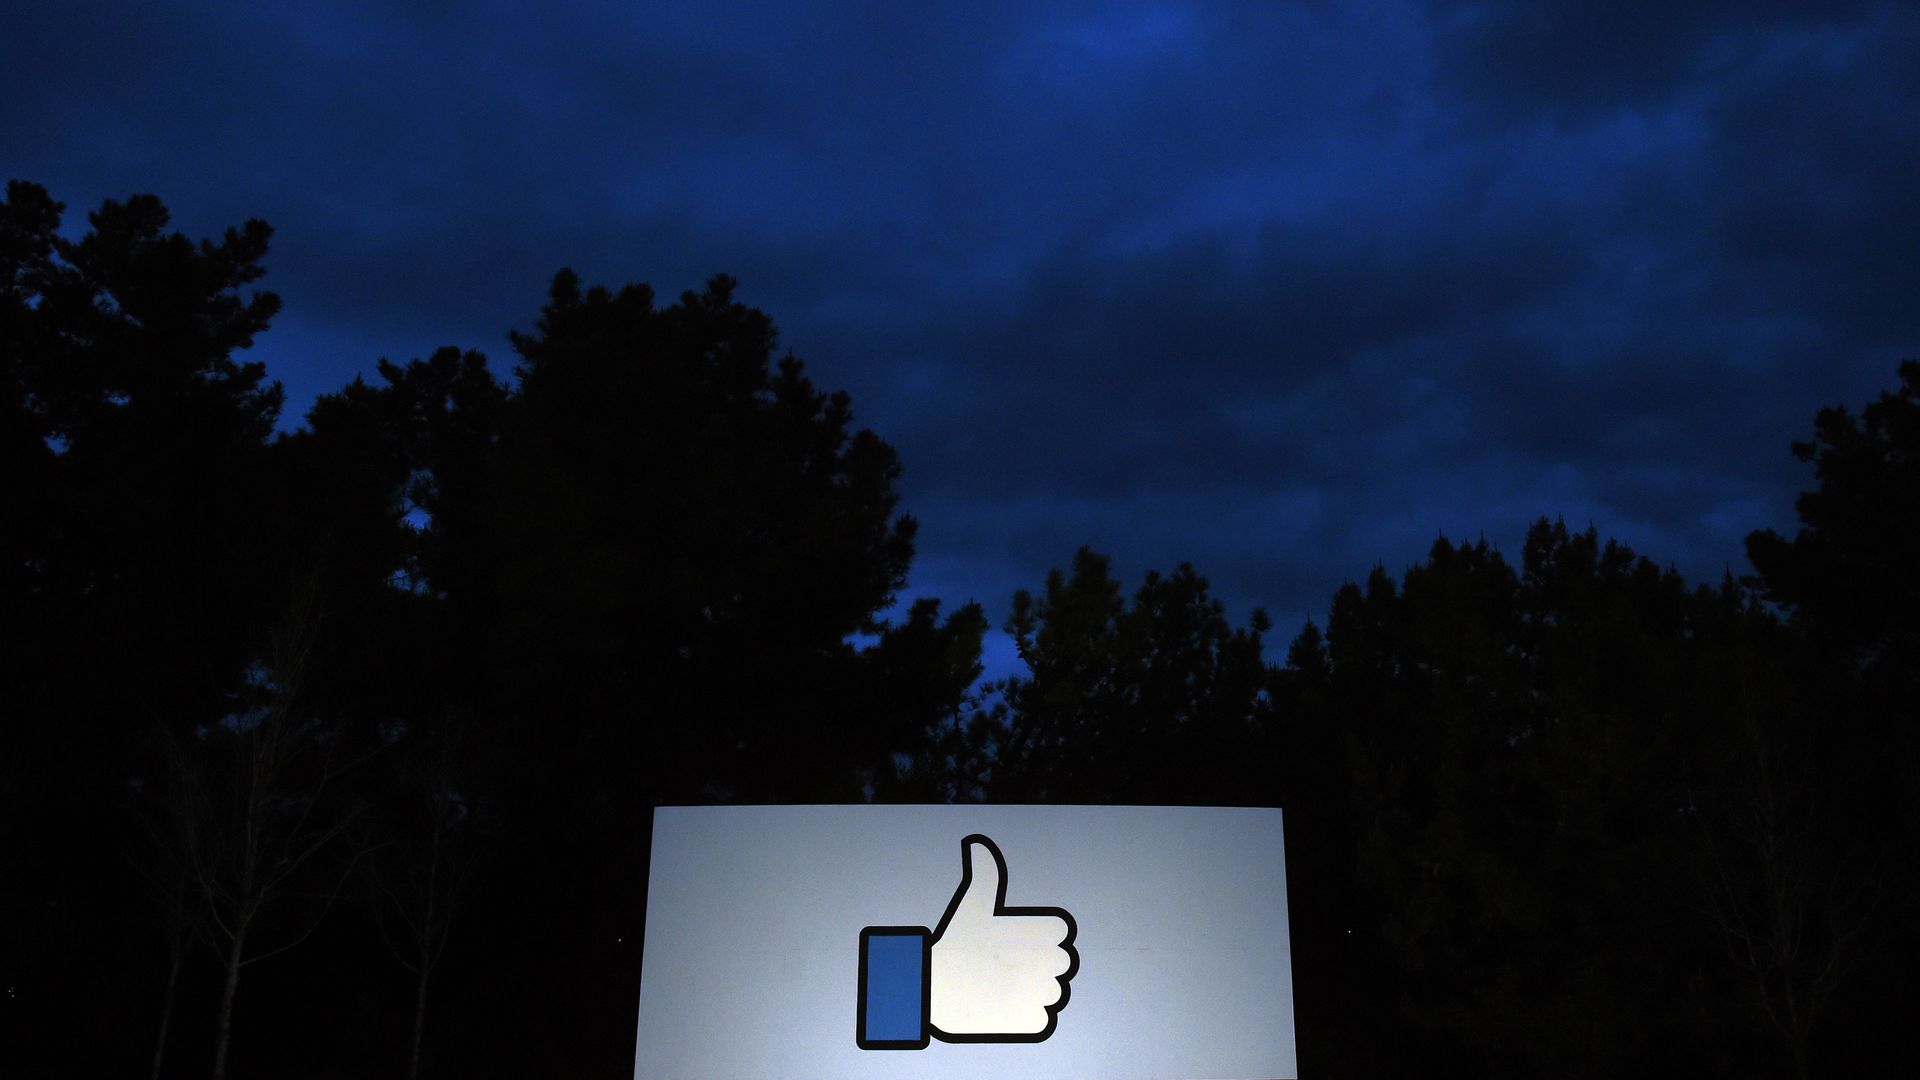 The Facebook "like" symbol on the sign outside their corporate headquarters